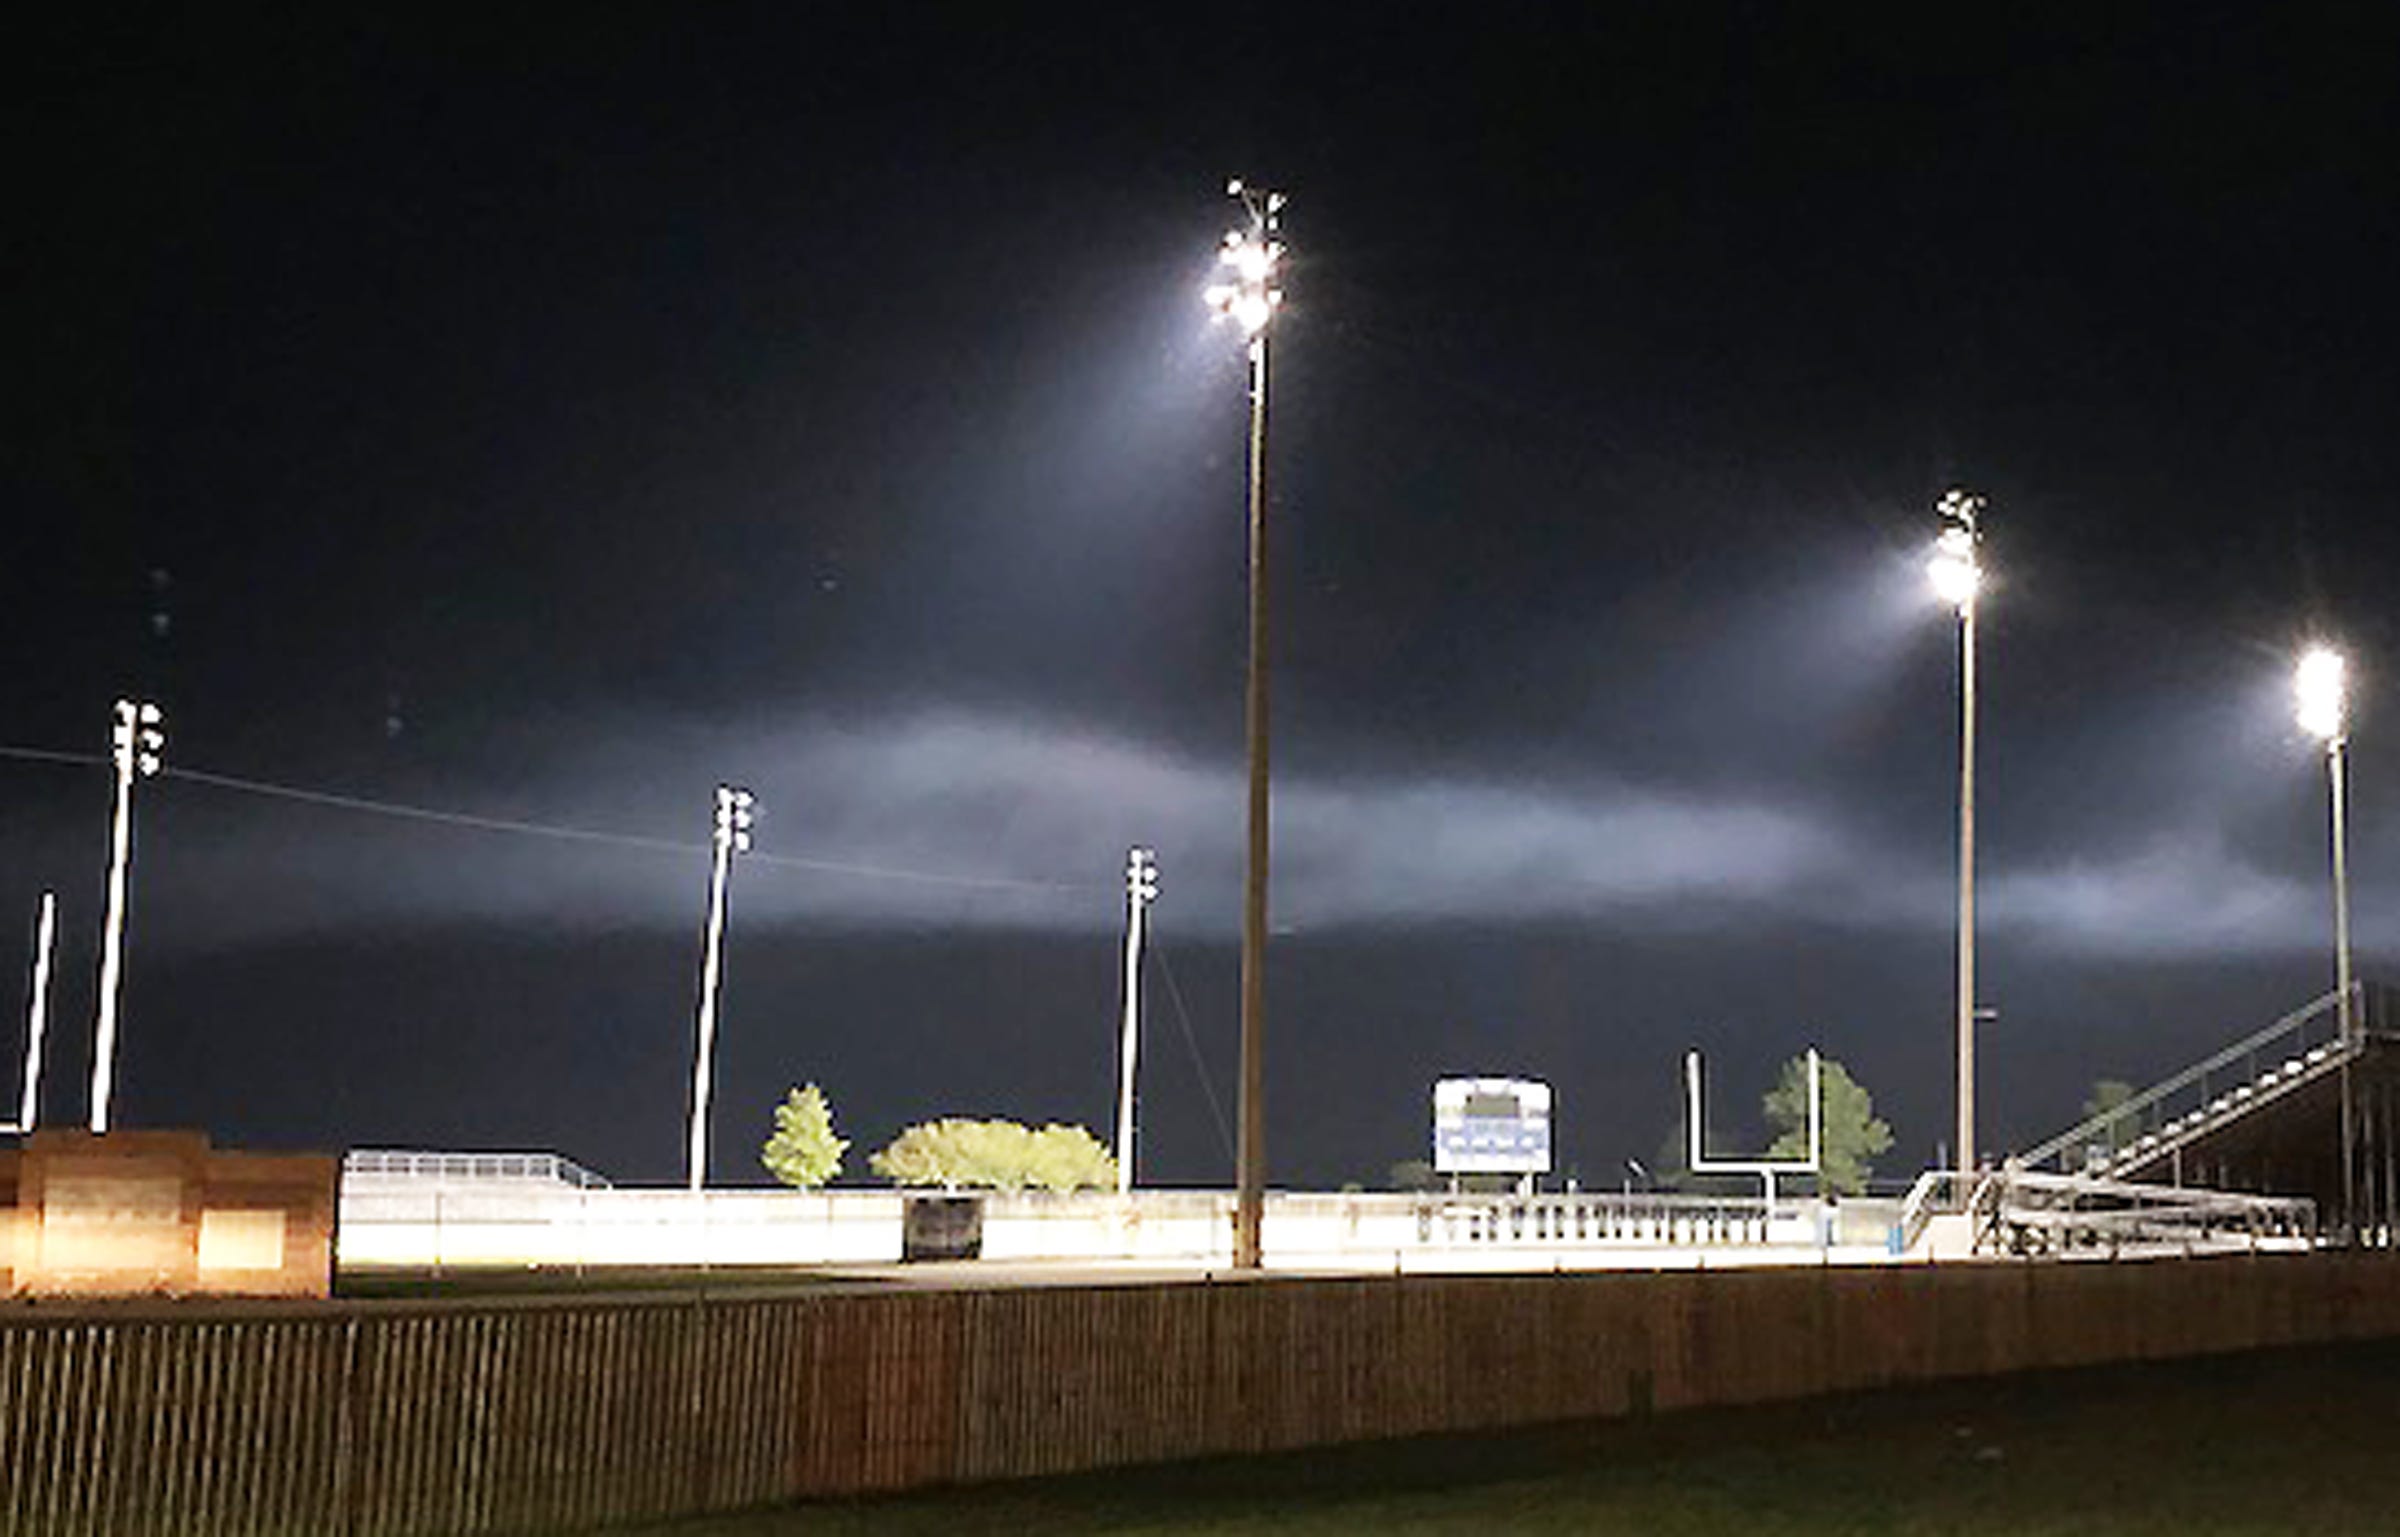 North Carolina school districts will see an increase in their electricity bills due to a substantial rate hike by Duke Energy for those operating sports field lighting.